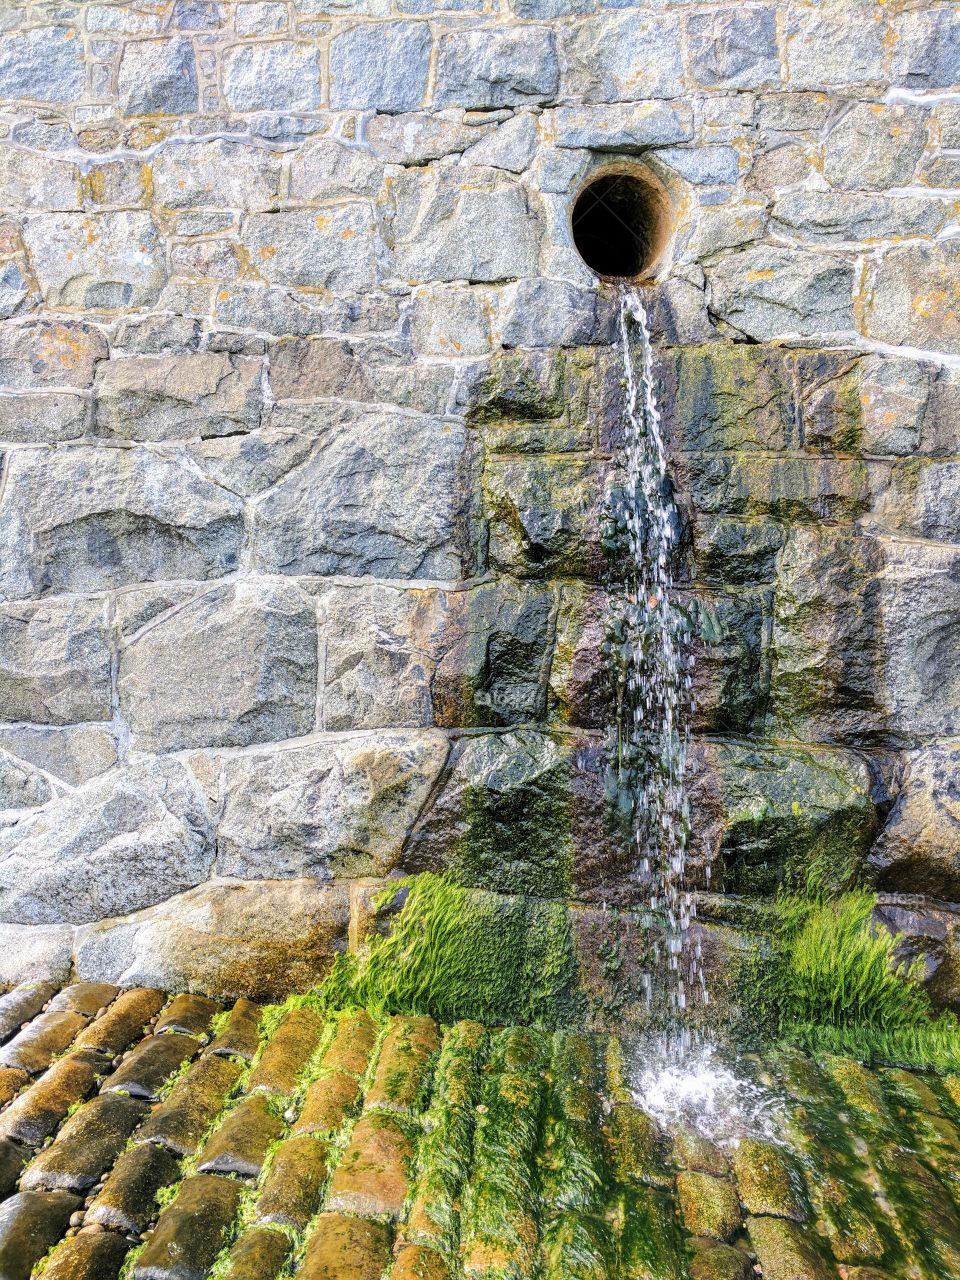 Water pouring out from an outlet pipe and cascading down the side of a granite stone wall.